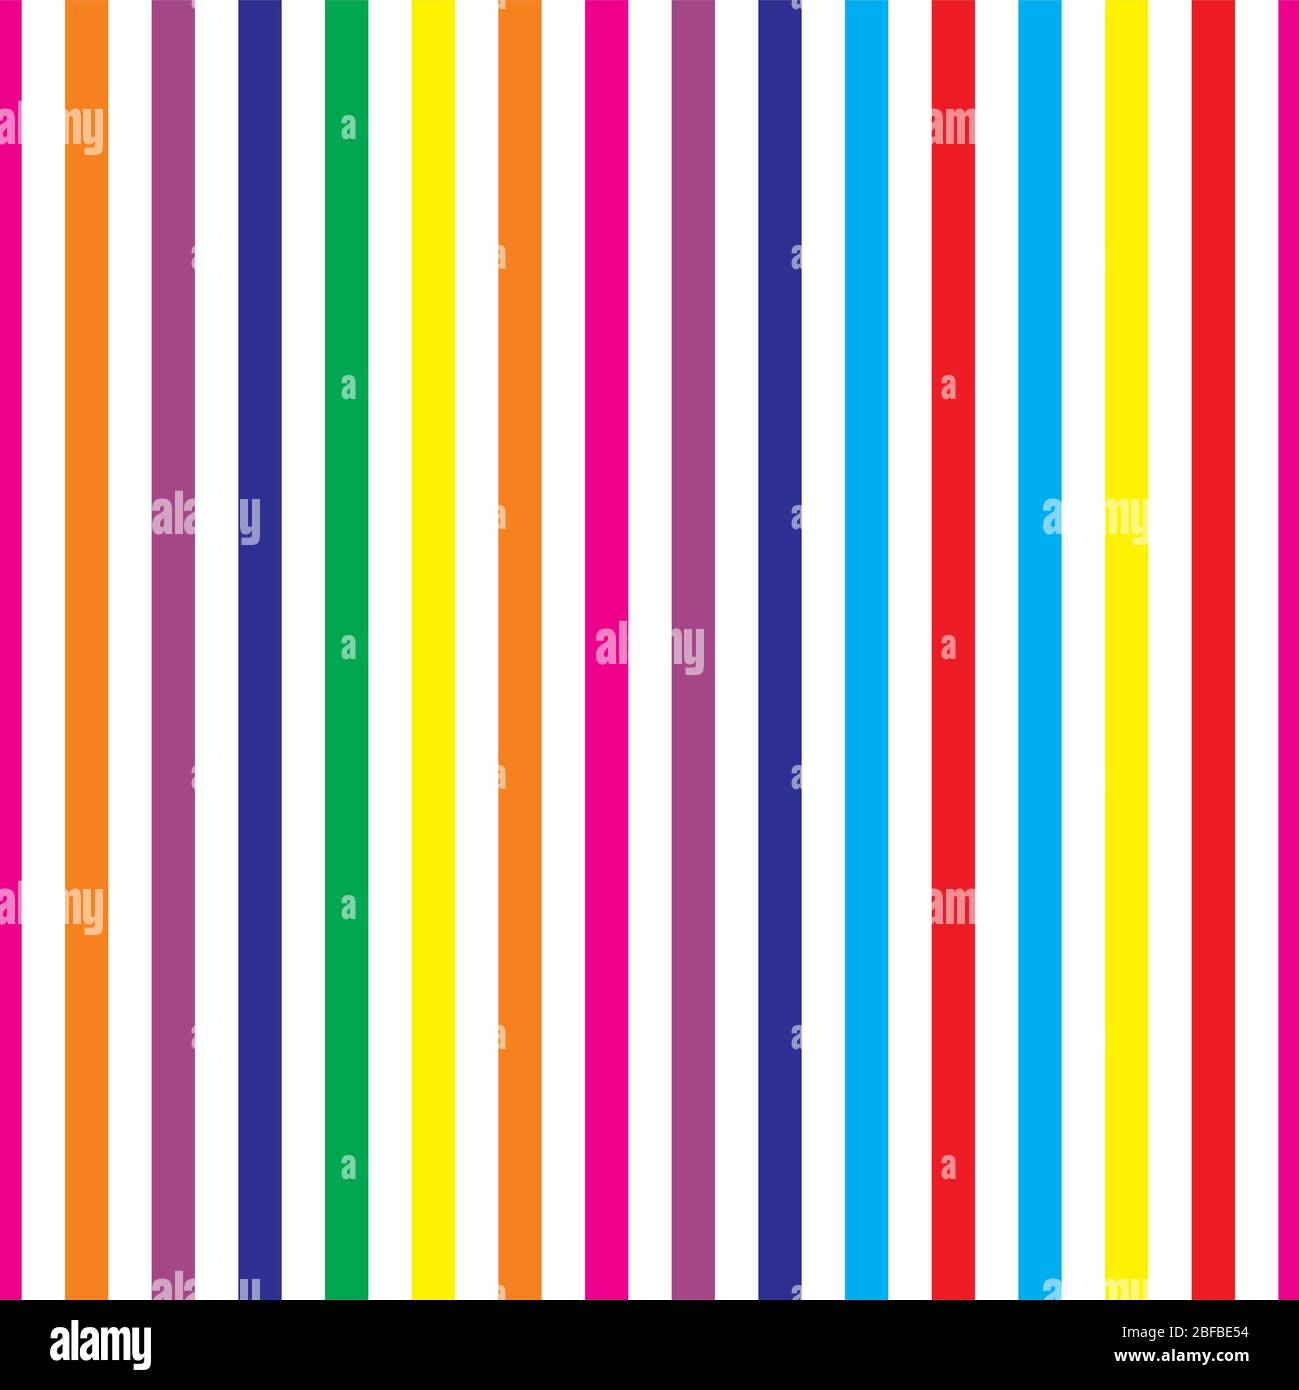 Seamless stripes vector background or pattern. Desktop wallpaper with colorful yellow, red, pink, green, blue, orange and violet stripes for kids webs Stock Vector